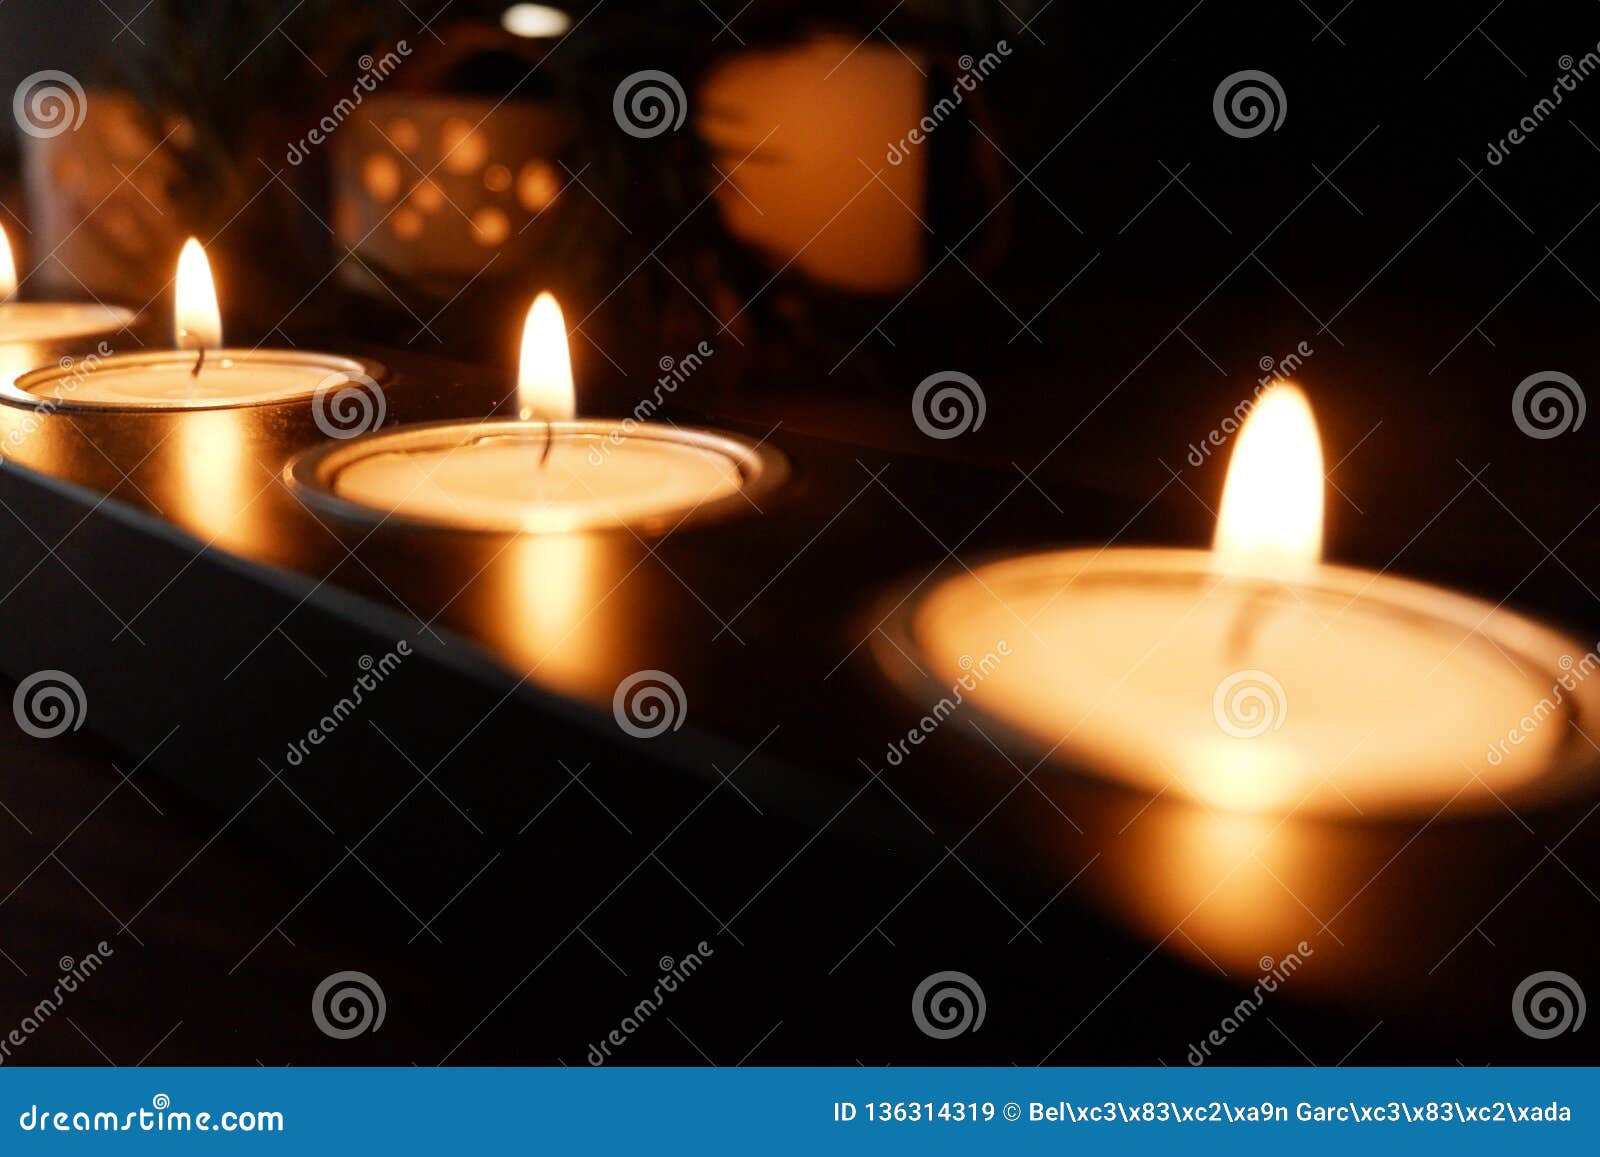 Candles For A Warm Illumination Stock Image - Image of style, candles ...